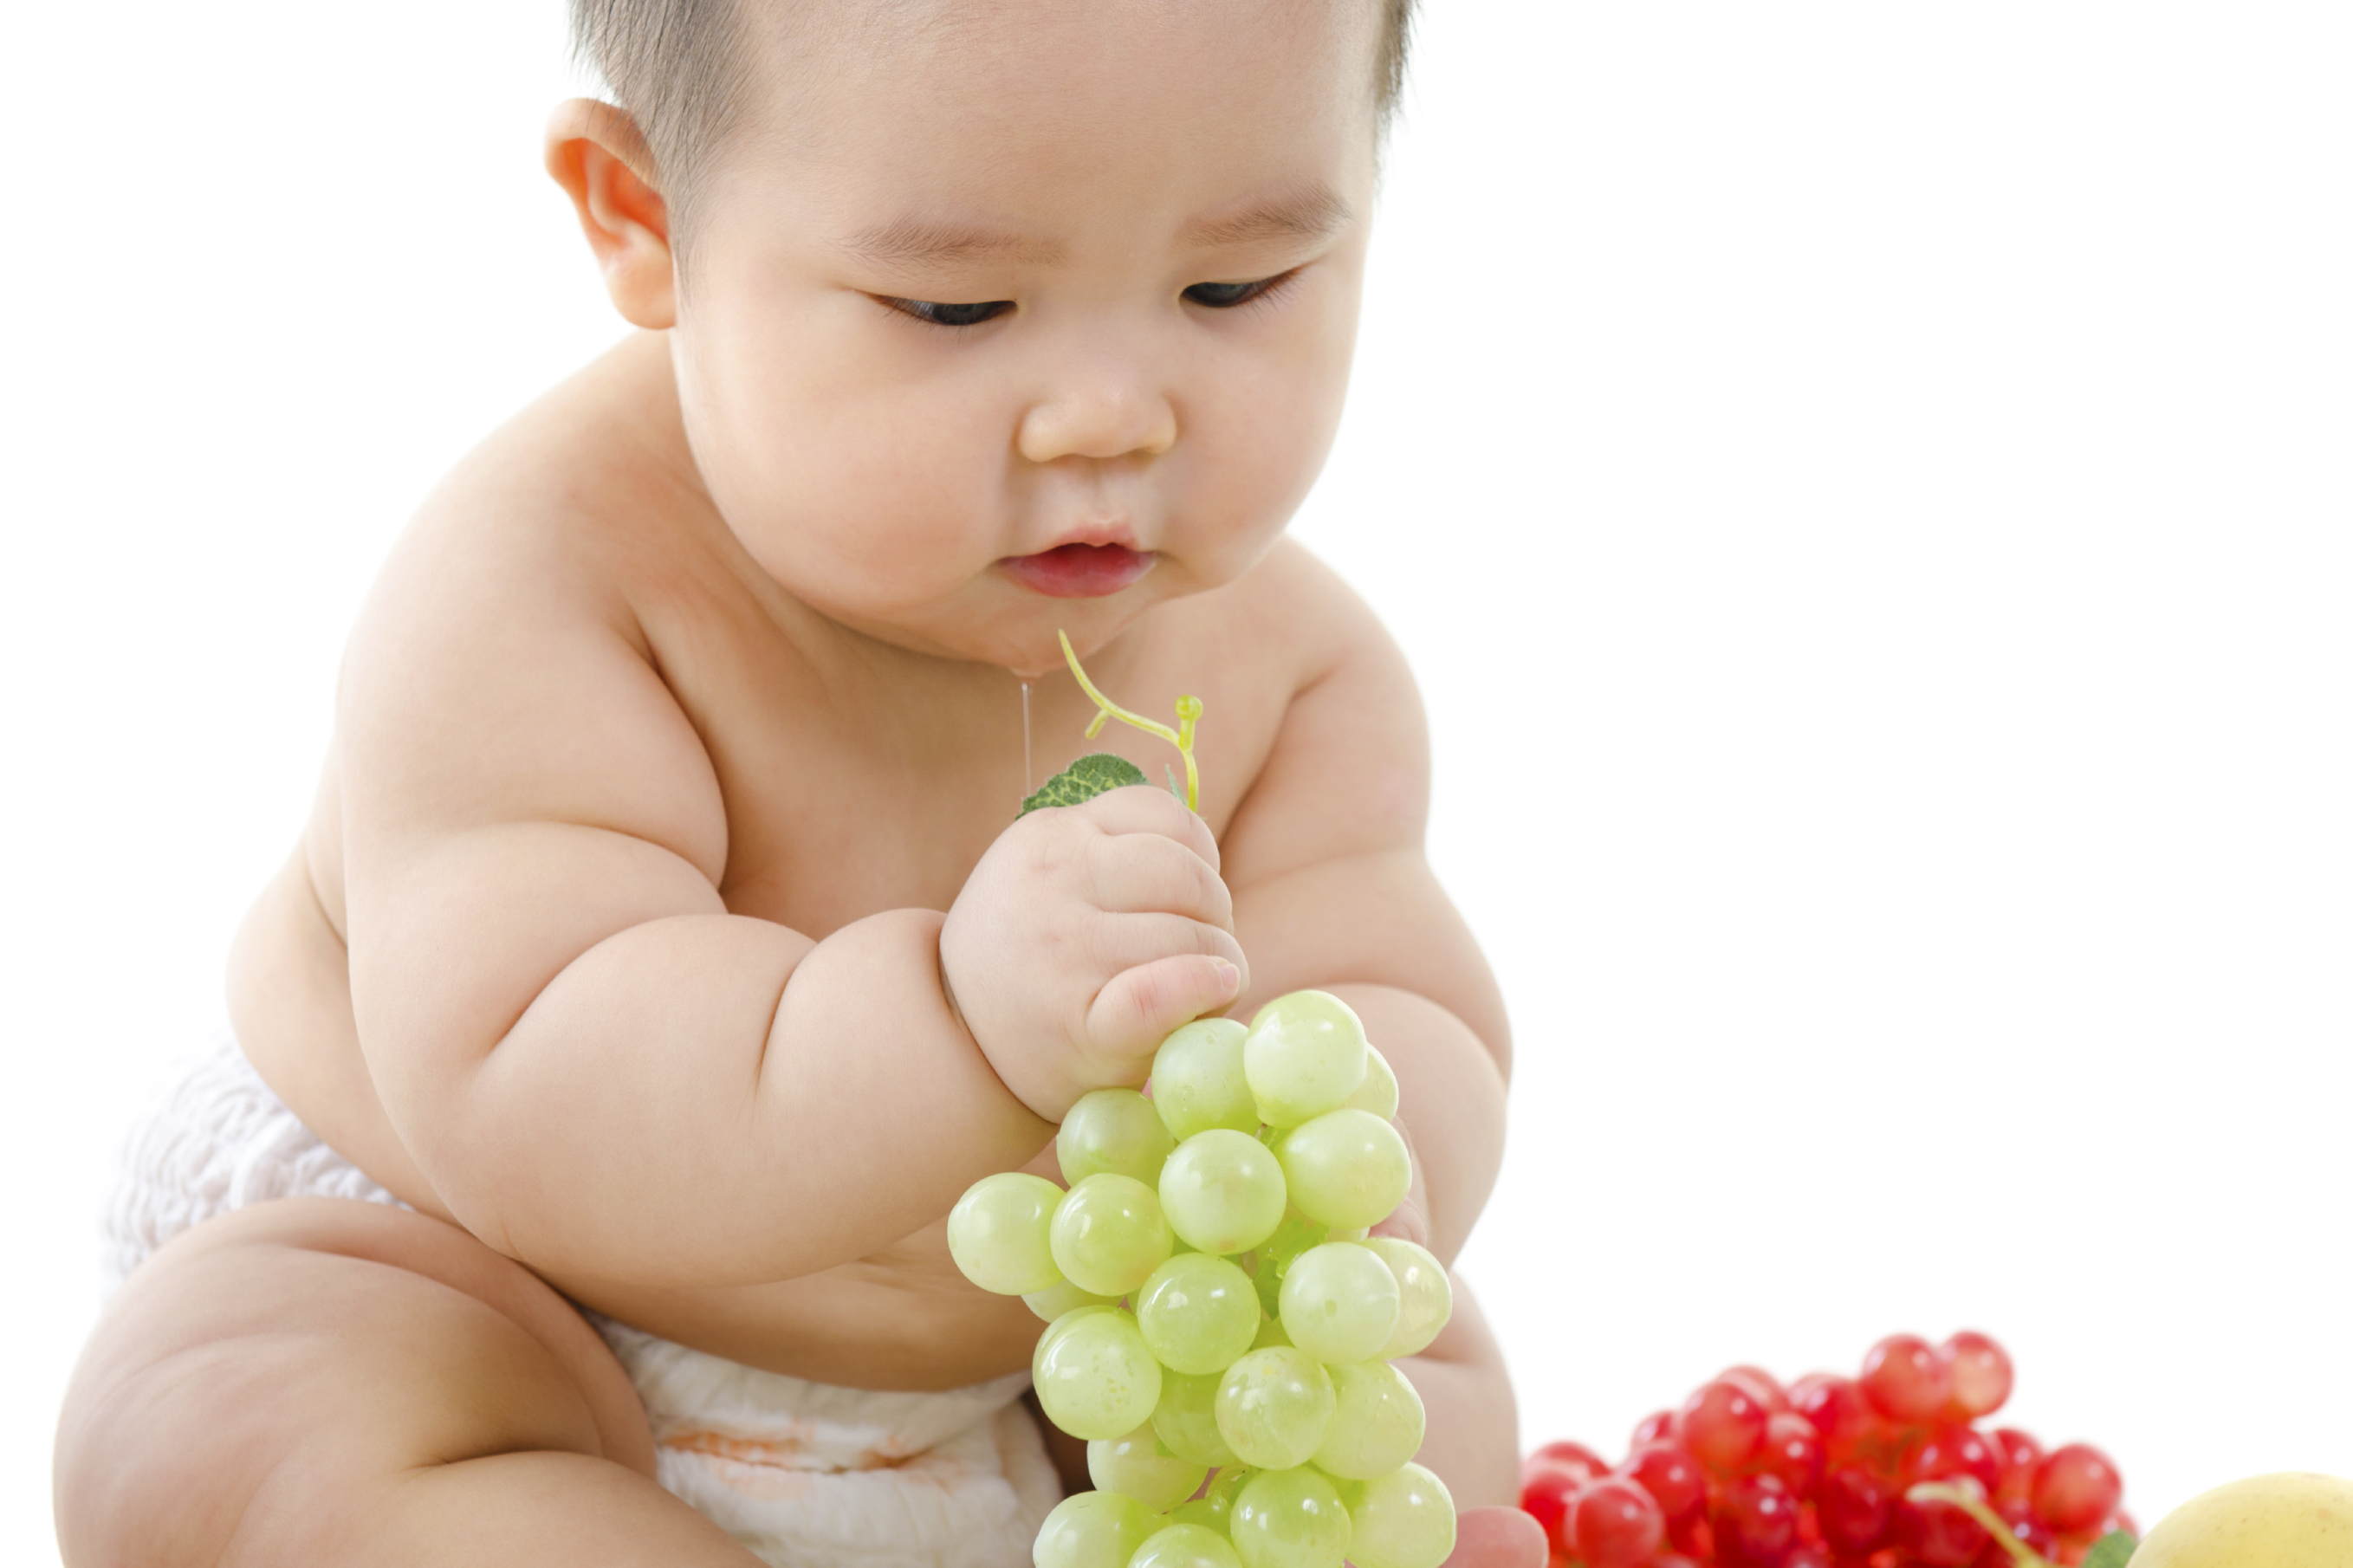 What to do About an Overweight Baby